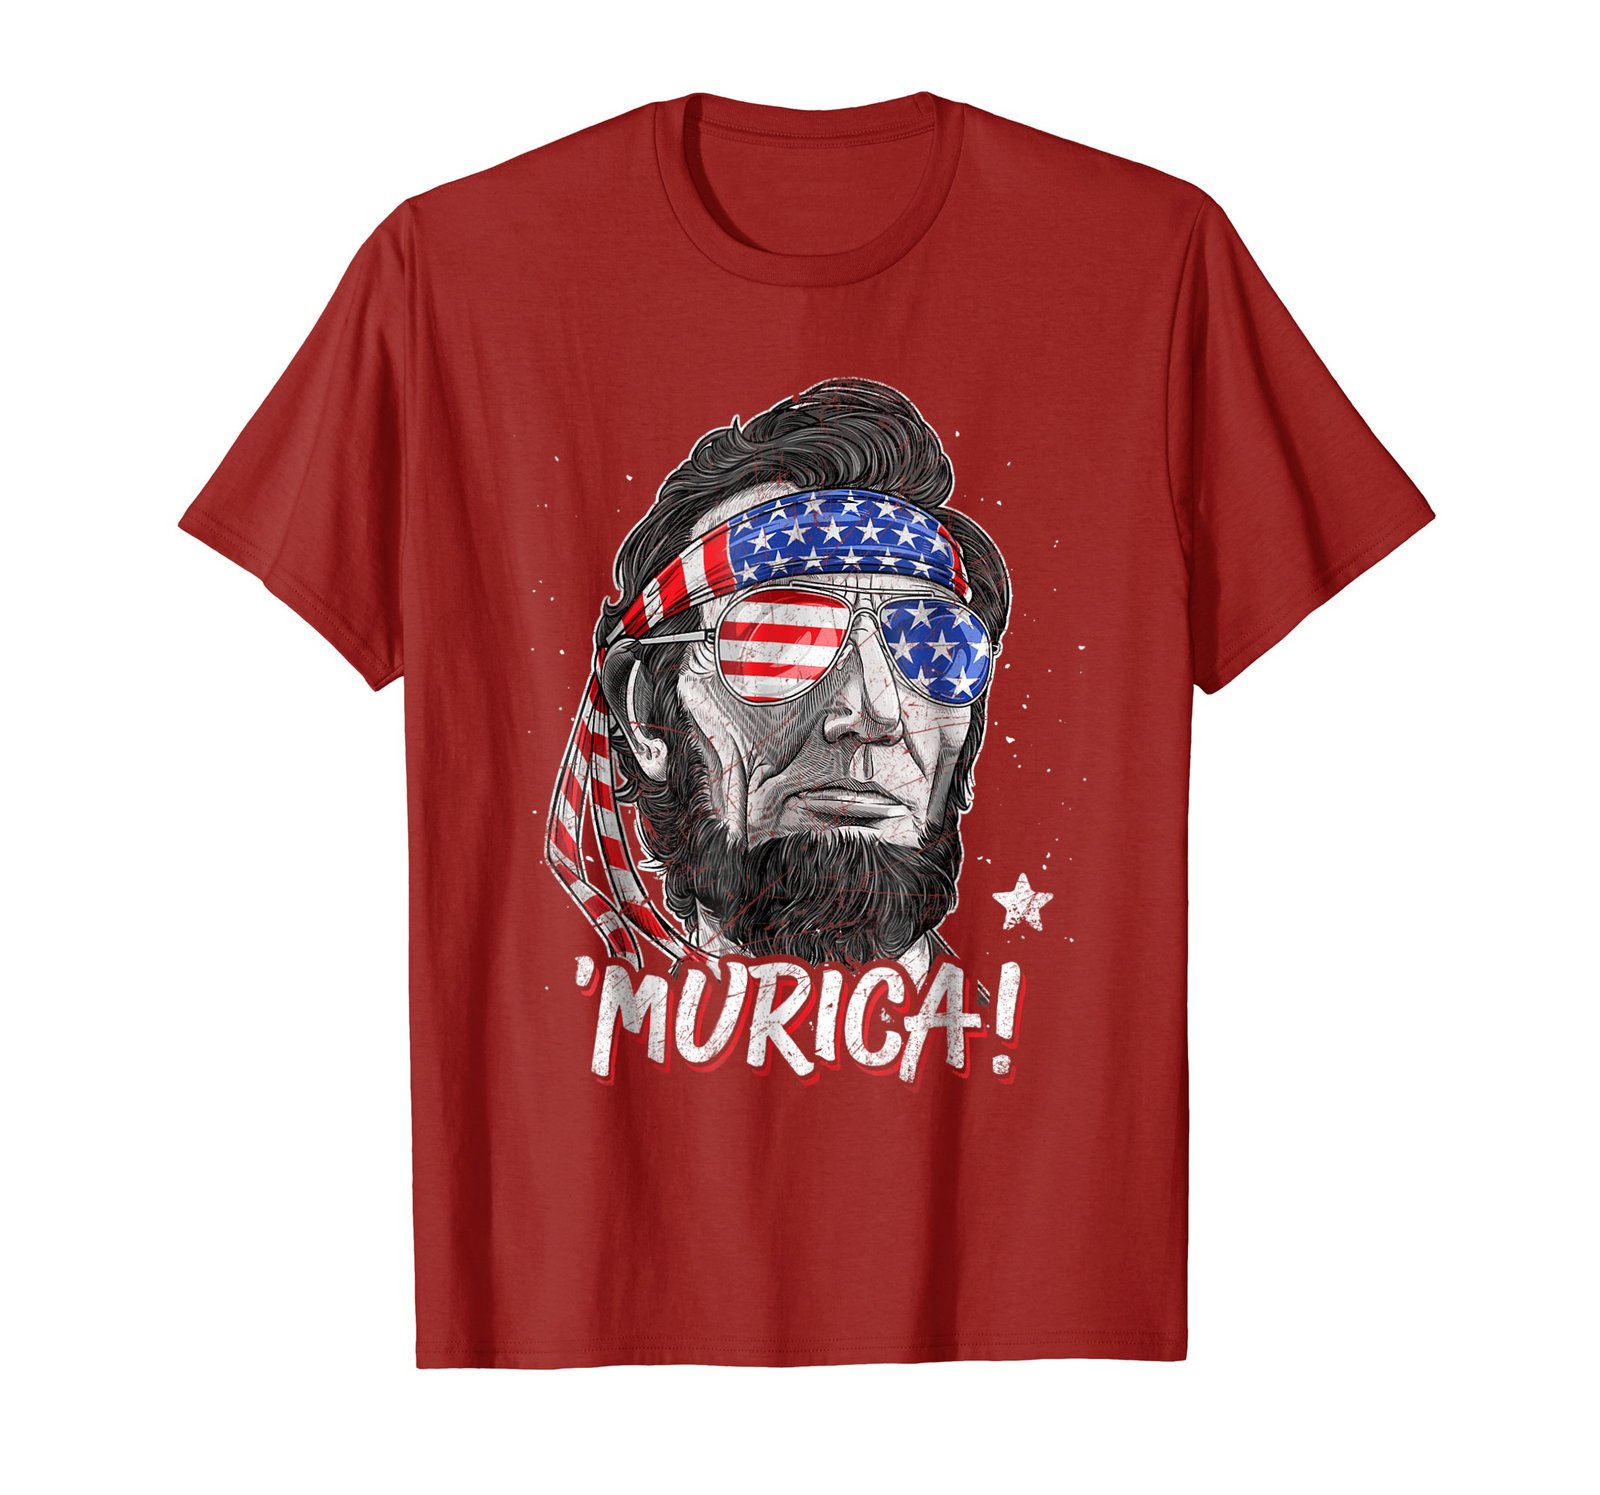 Funny TeeMerica Abe Lincoln T shirt 4th of July American Flag Murica Men